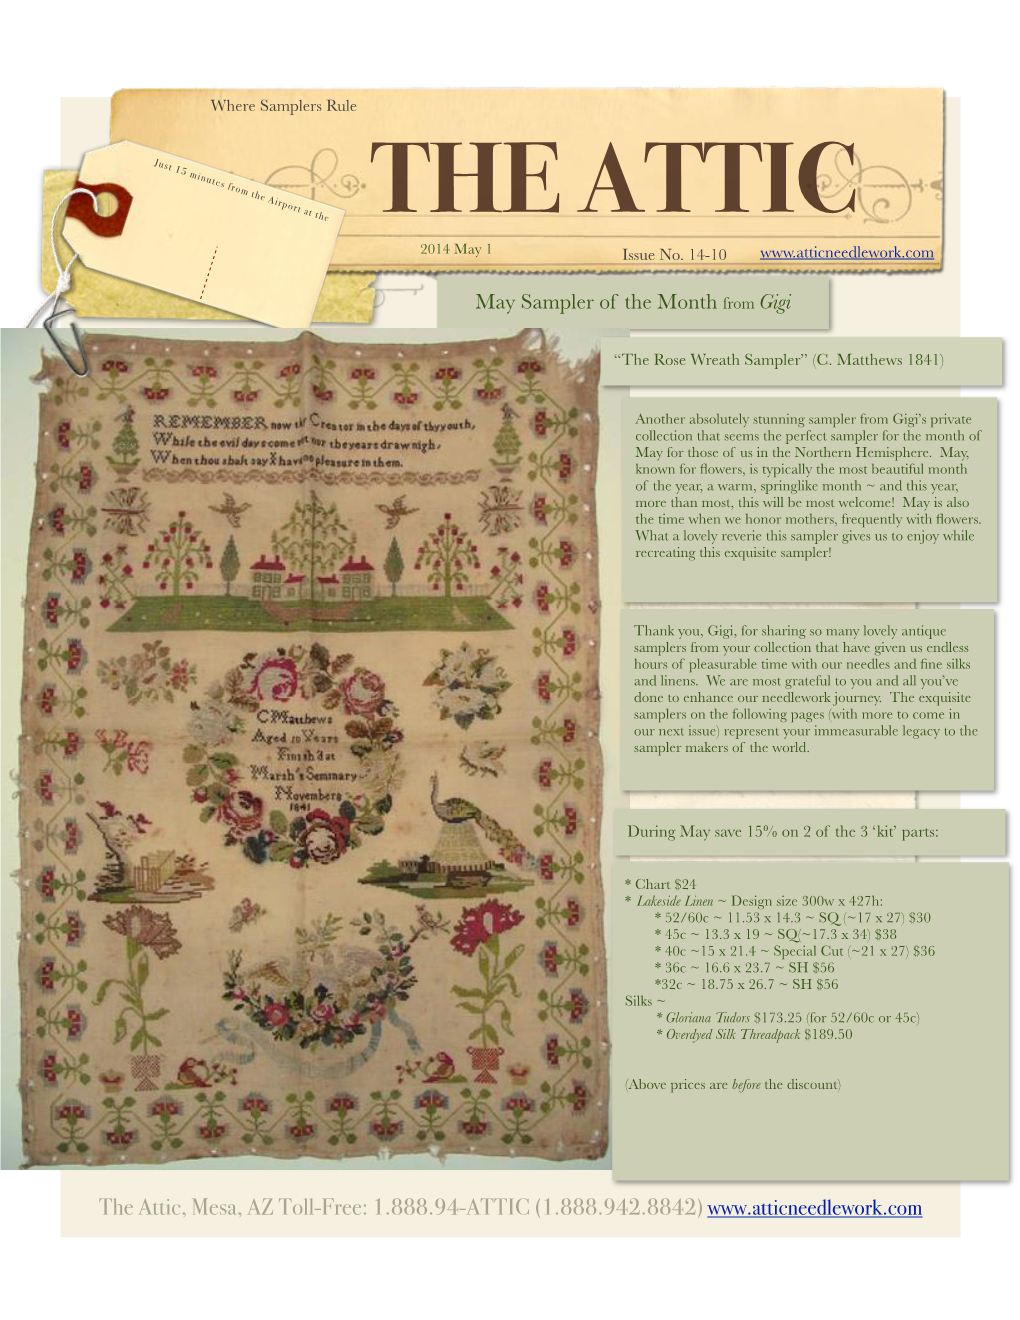 THE ATTIC 2014 May 1 Issue No